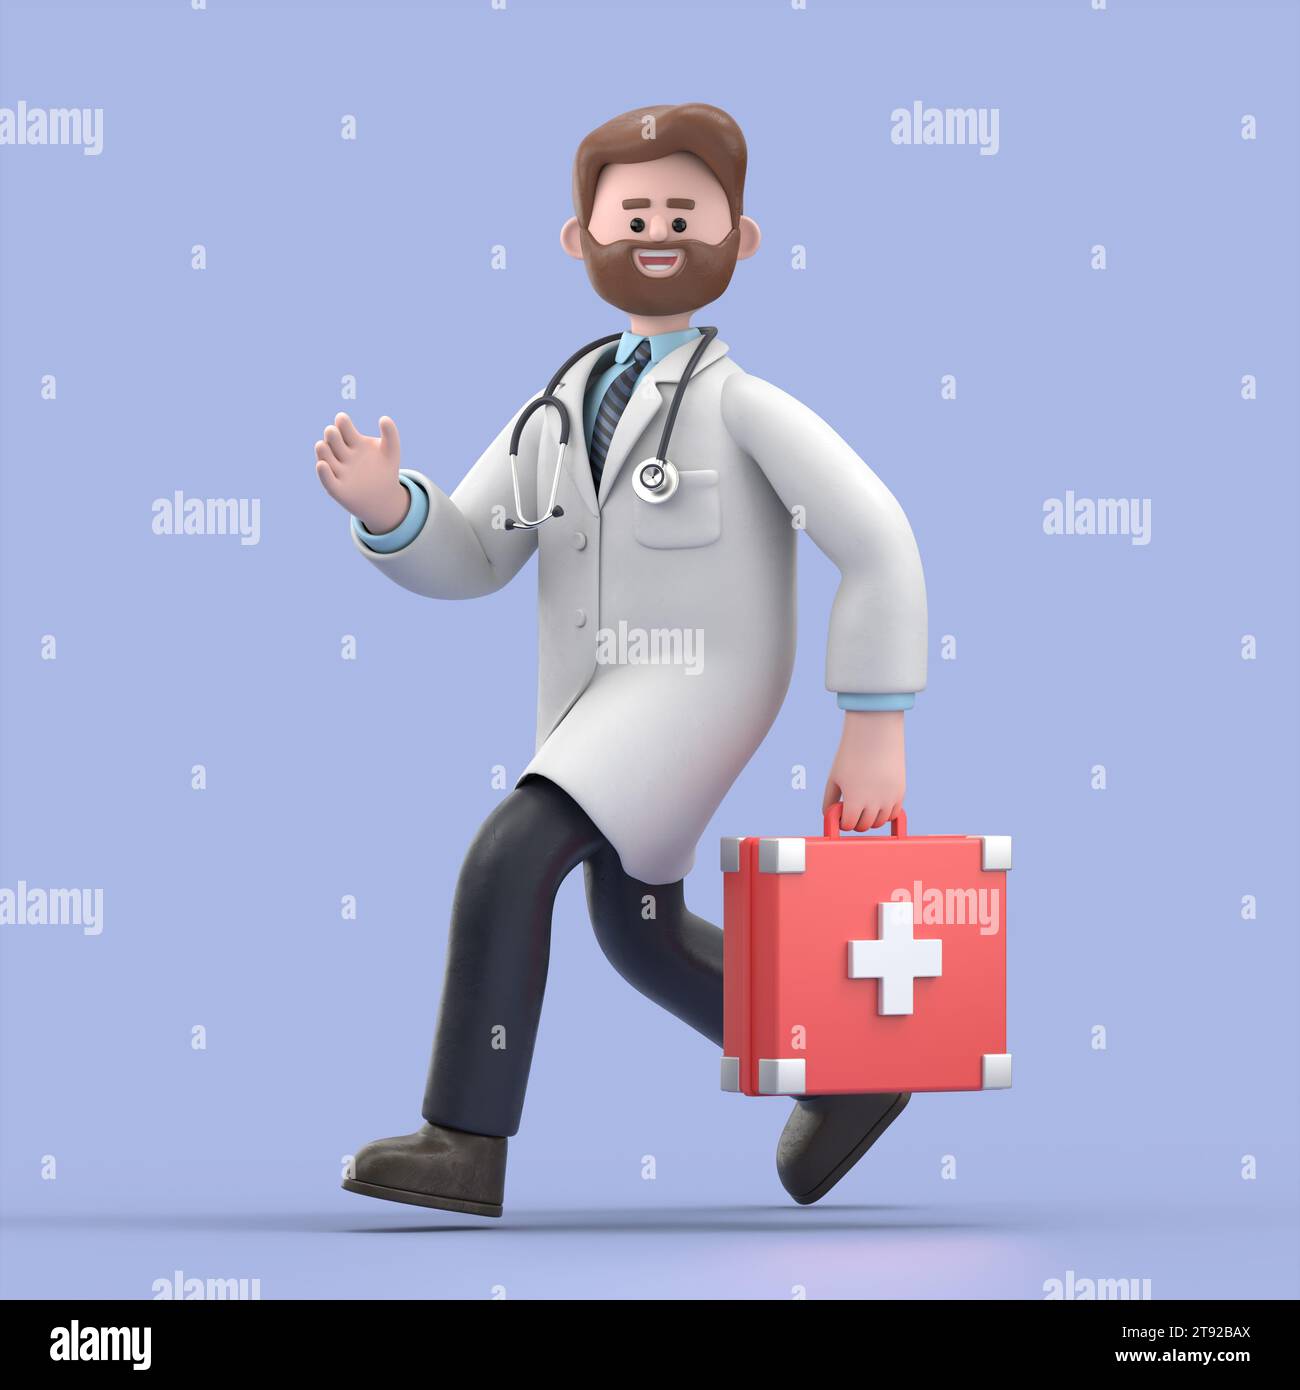 3D illustration of Male Doctor Iverson runs.Medical presentation clip art isolated on blue background. Stock Photo